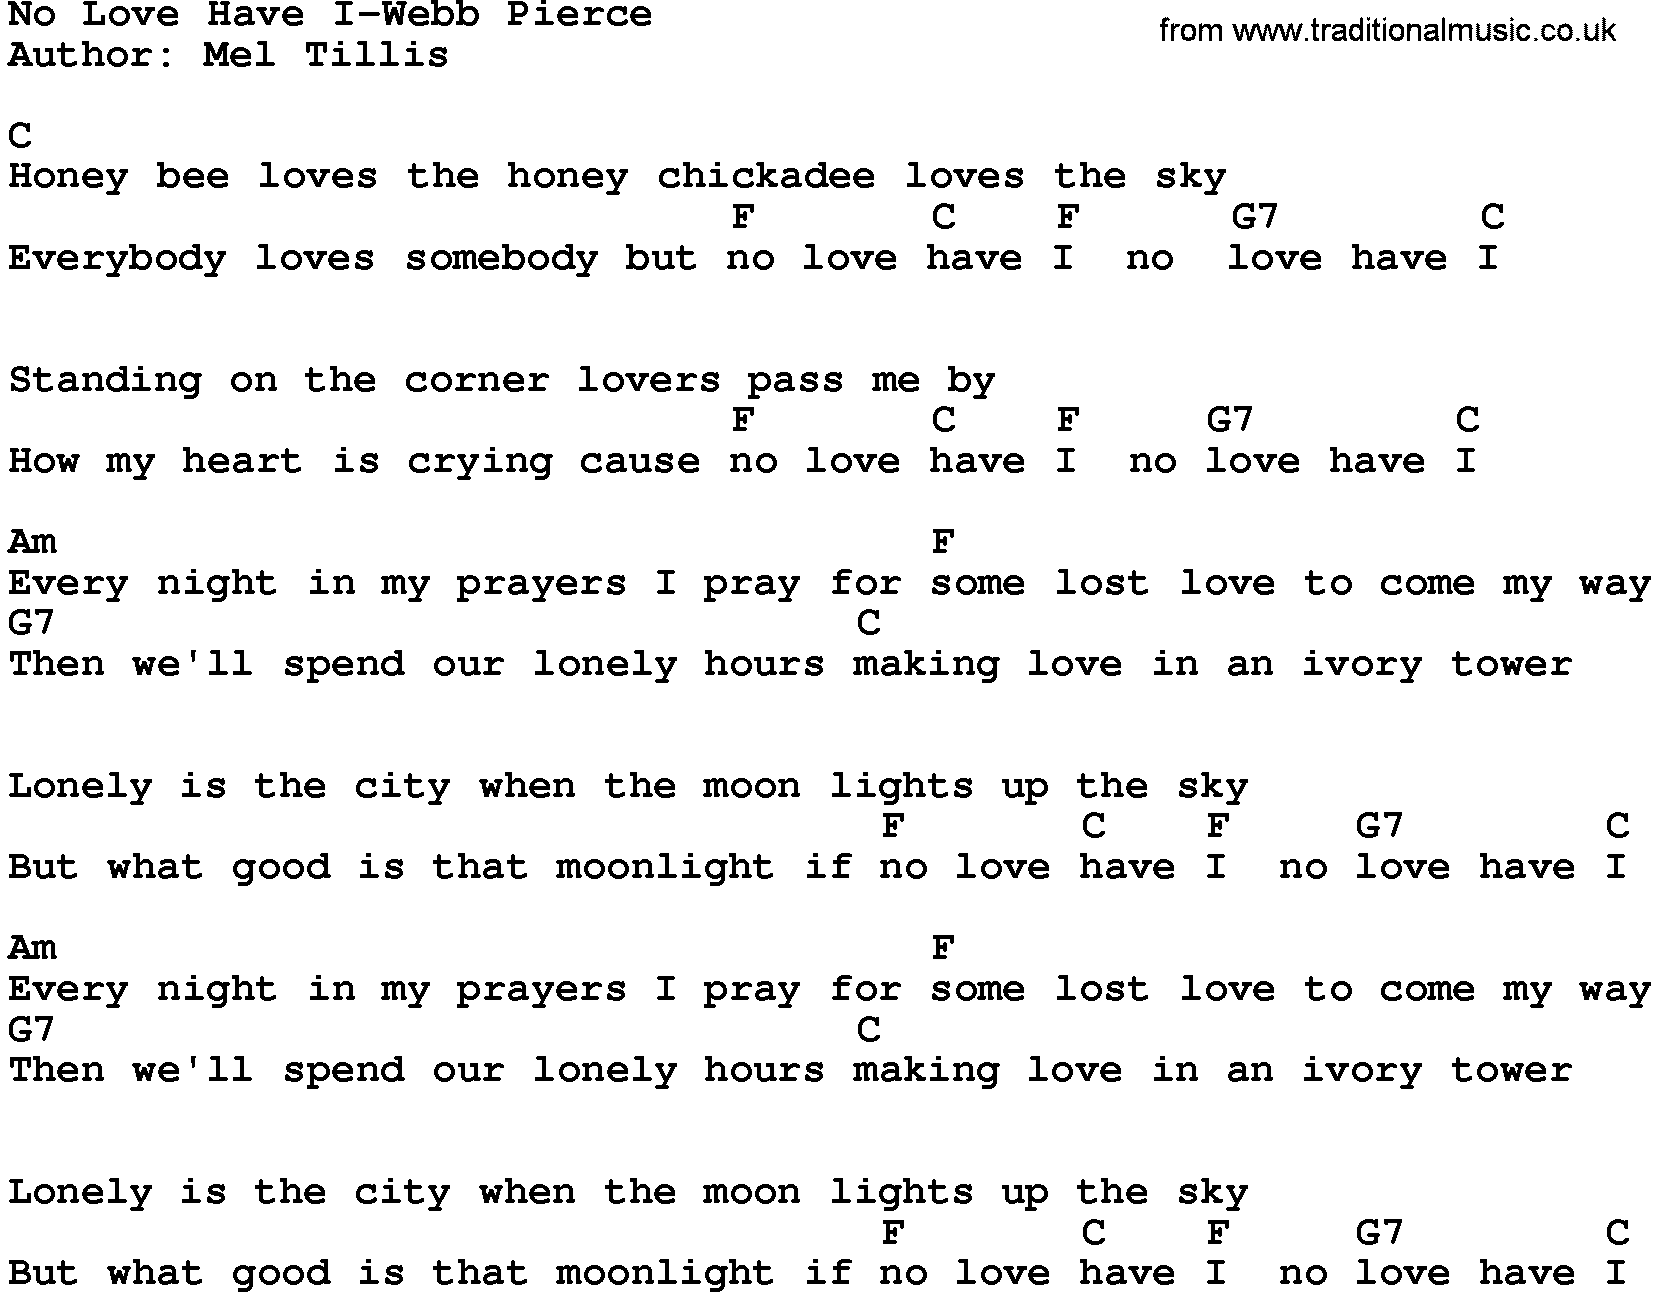 Country music song: No Love Have I-Webb Pierce lyrics and chords